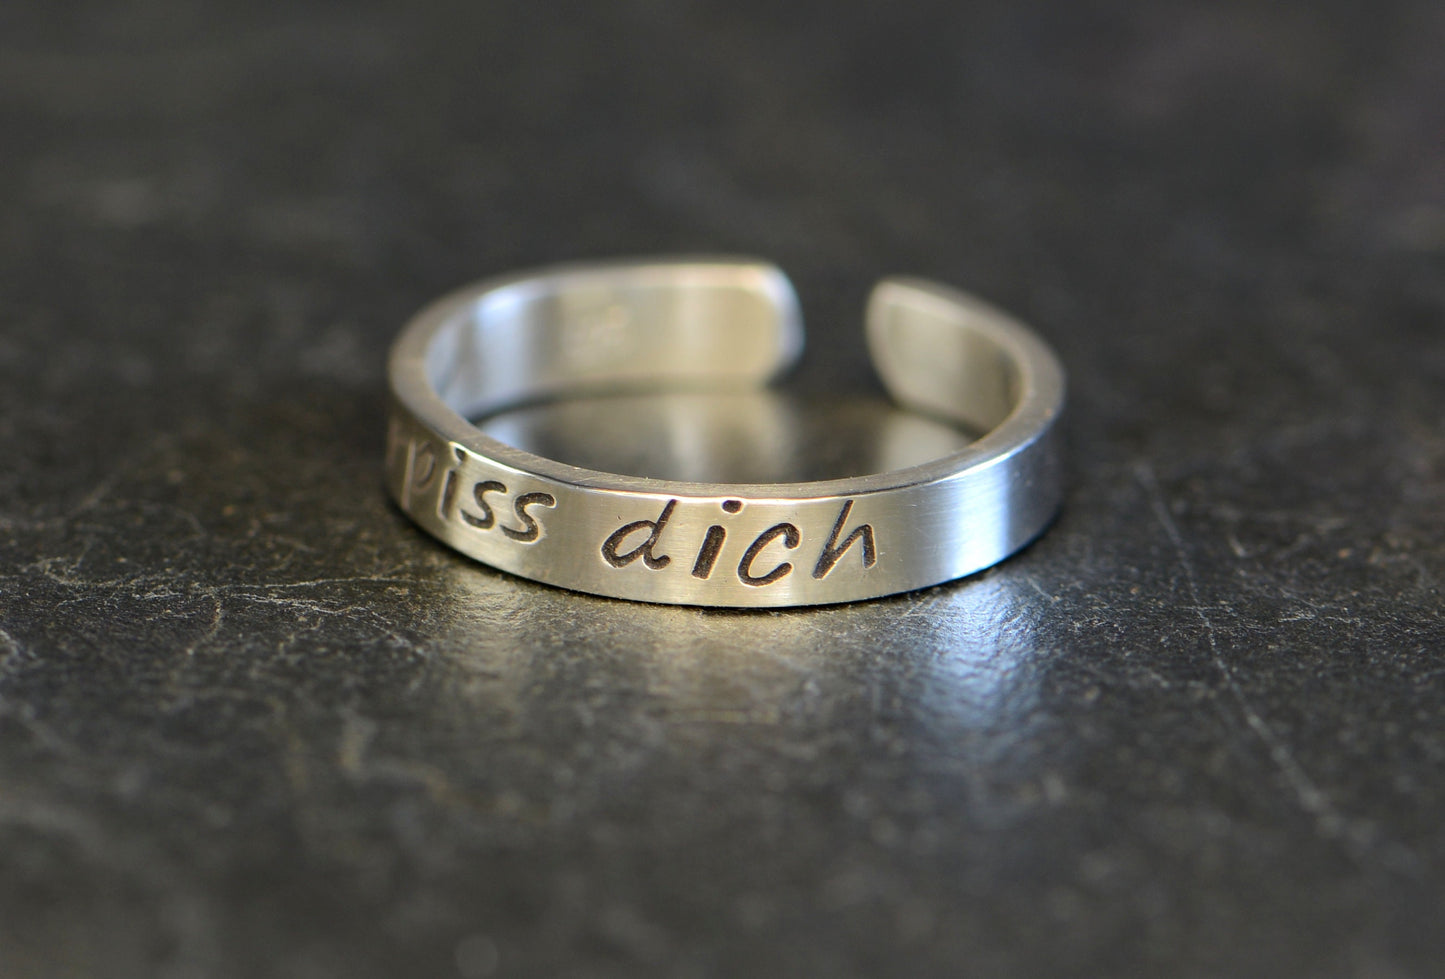 Verpiss Dich Sterling Silver Toe Ring – Go “Screw Yourself” or Piss Off German Ring